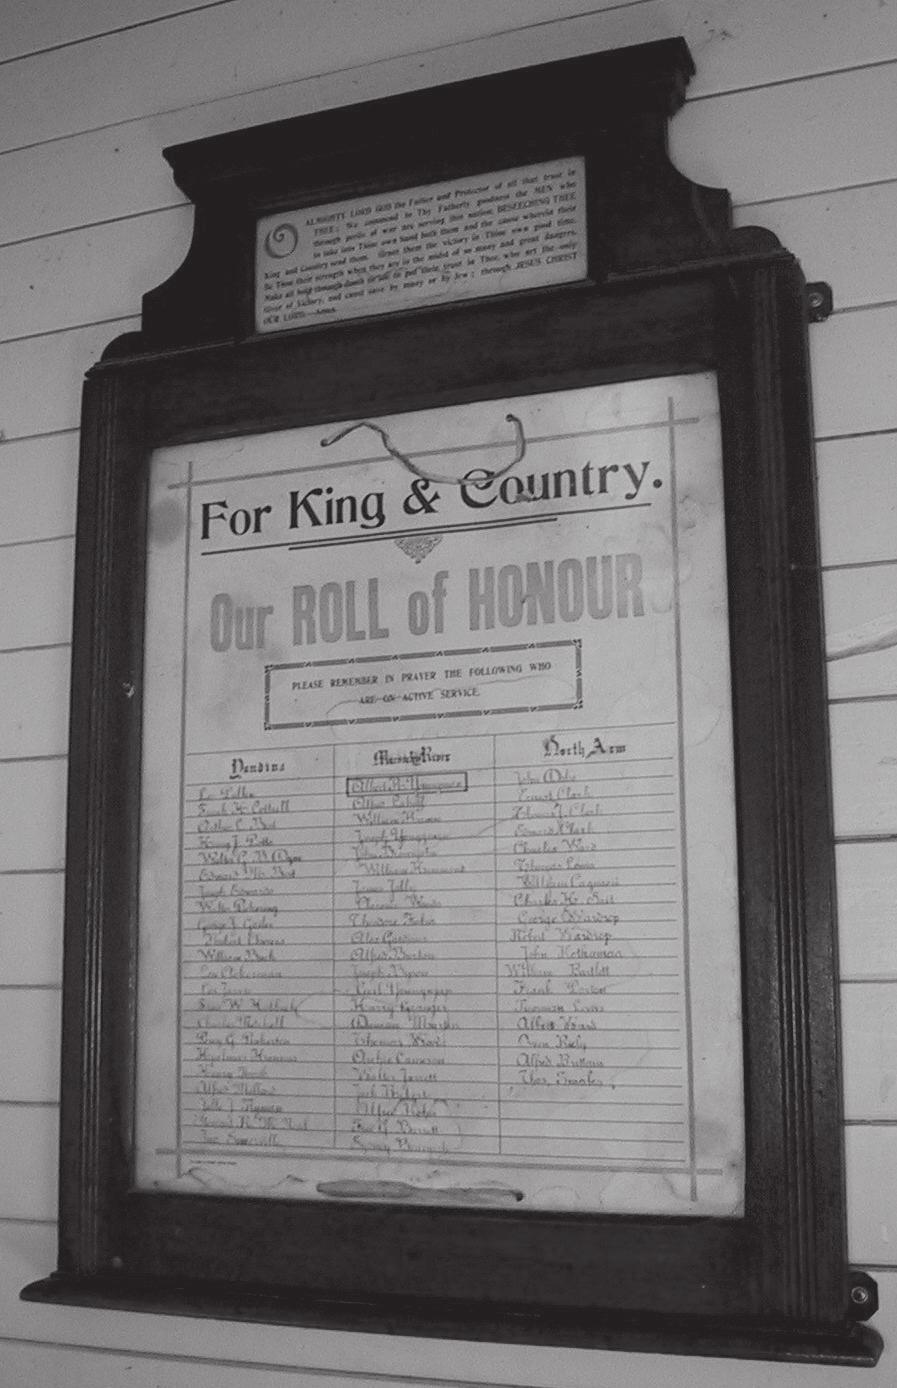 Honour Board for World War One given by John and Agnes McNab. (Melissa Brown) Yandina Les Pullon, Frank H. Cottrell, Arthur L. Best, Henry J. Potts, Walter G.B. Dyne, Edward M.